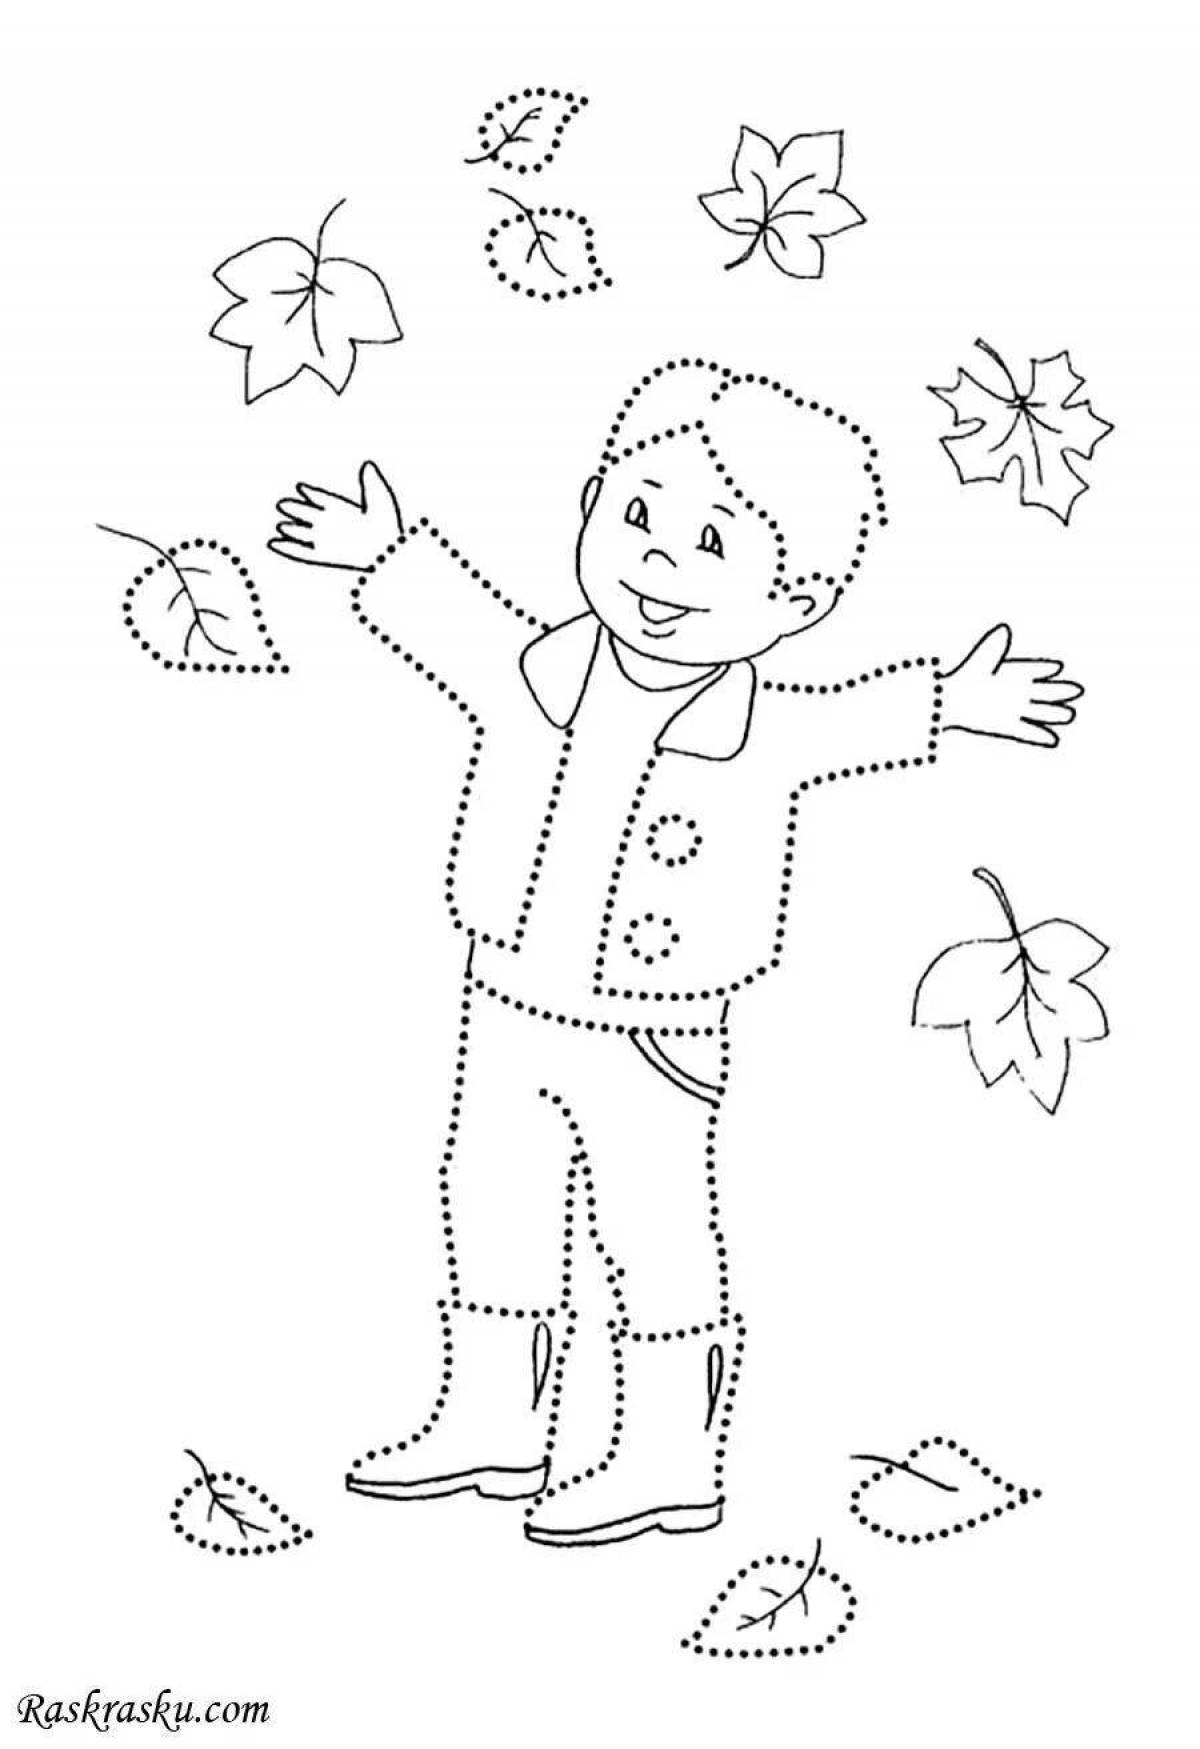 Playful themed coloring book